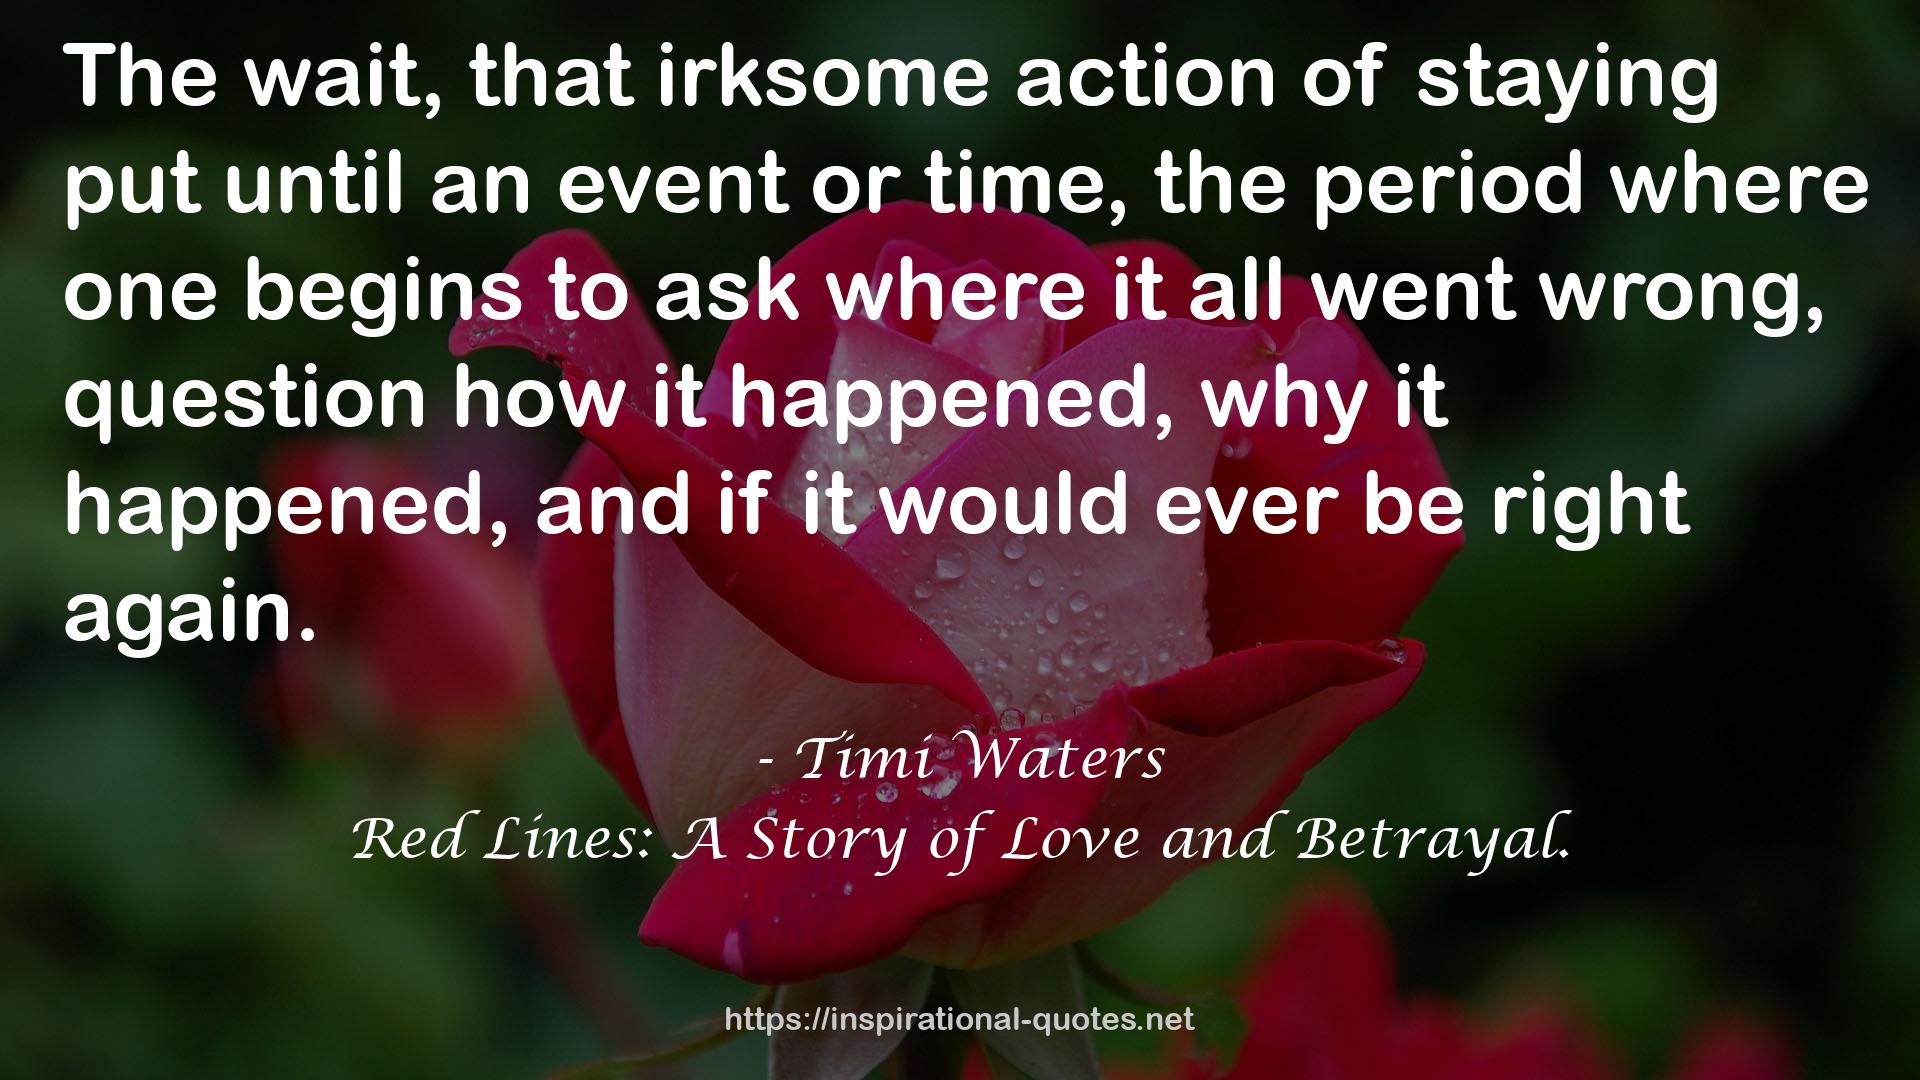 Timi Waters QUOTES